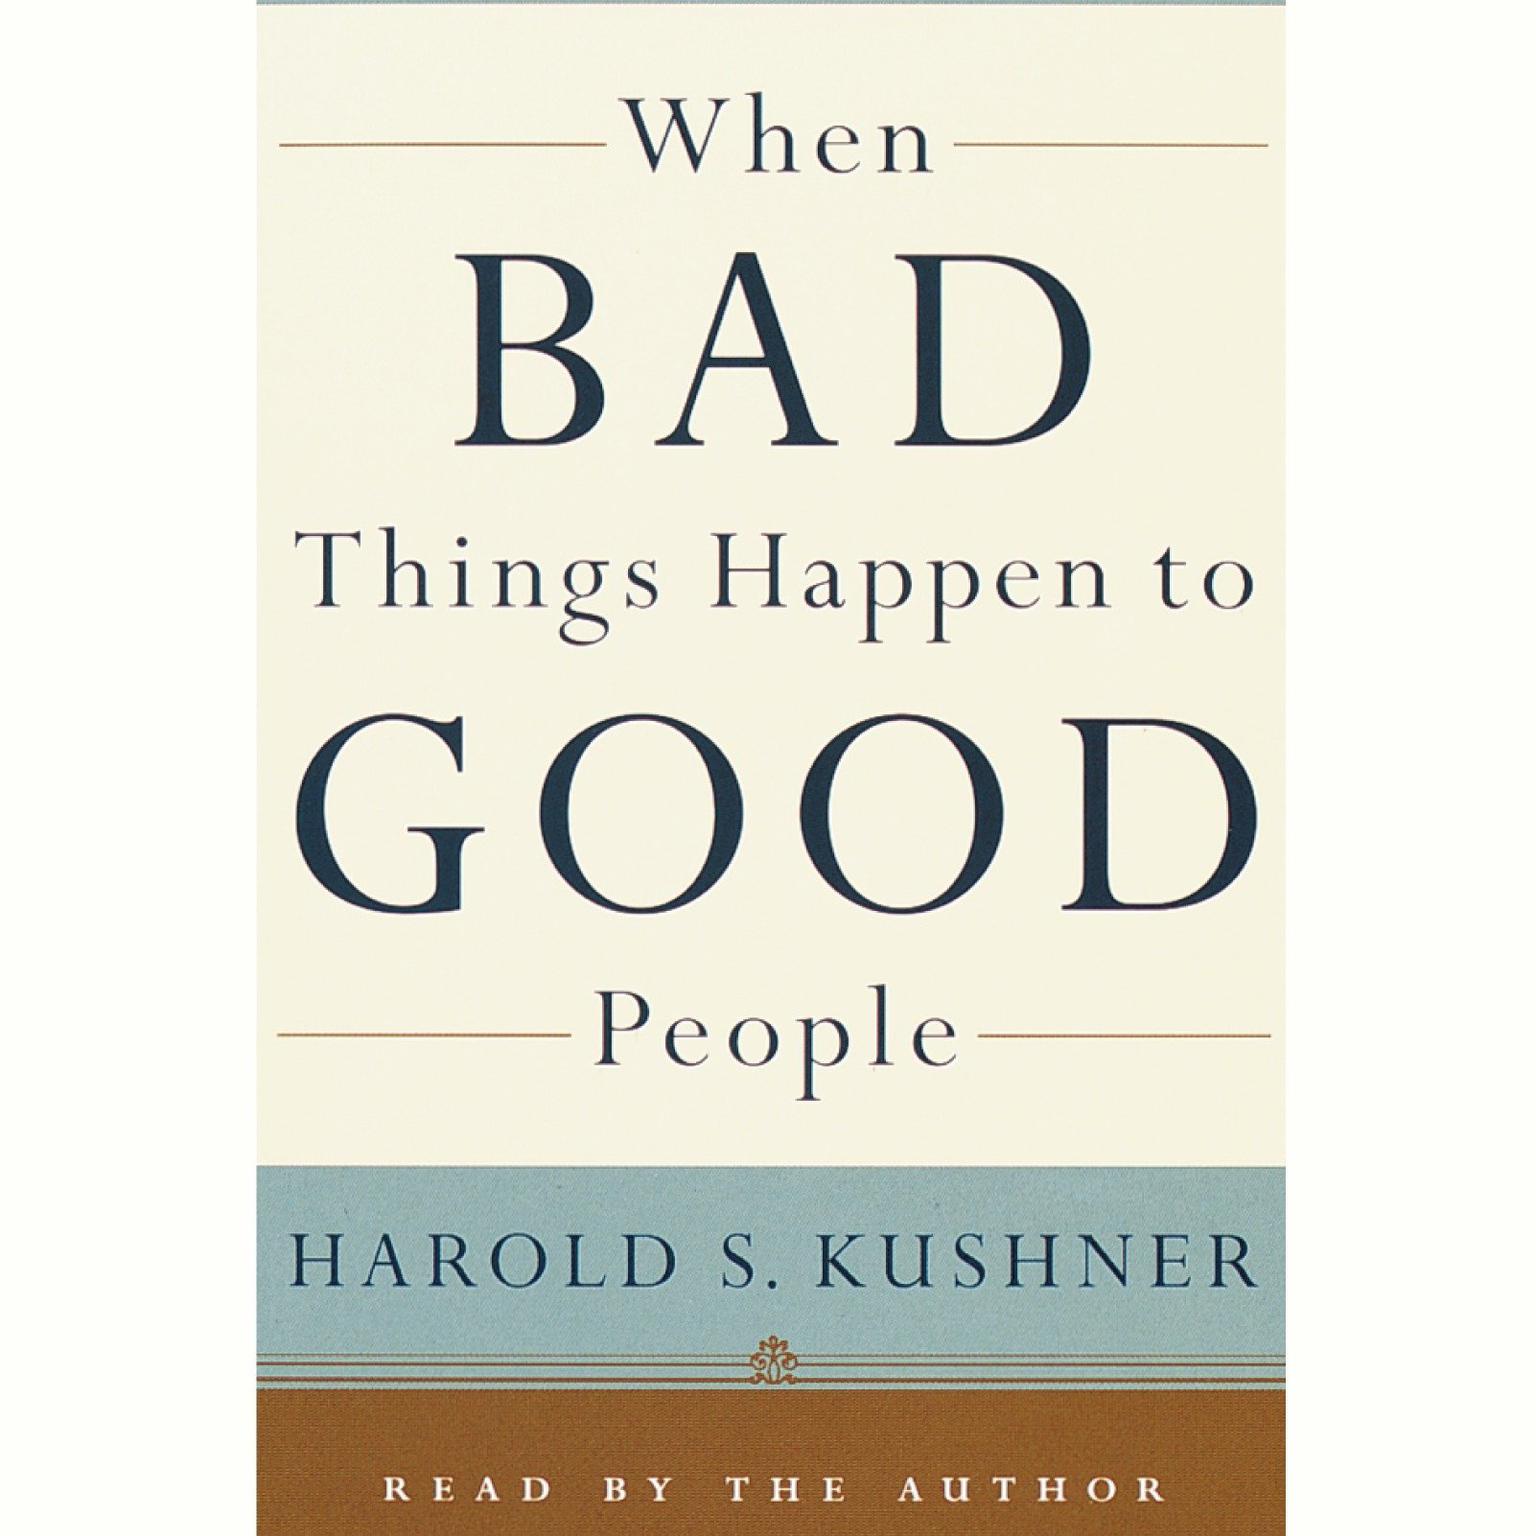 When Bad Things Happen to Good People (Abridged) Audiobook, by Harold S. Kushner